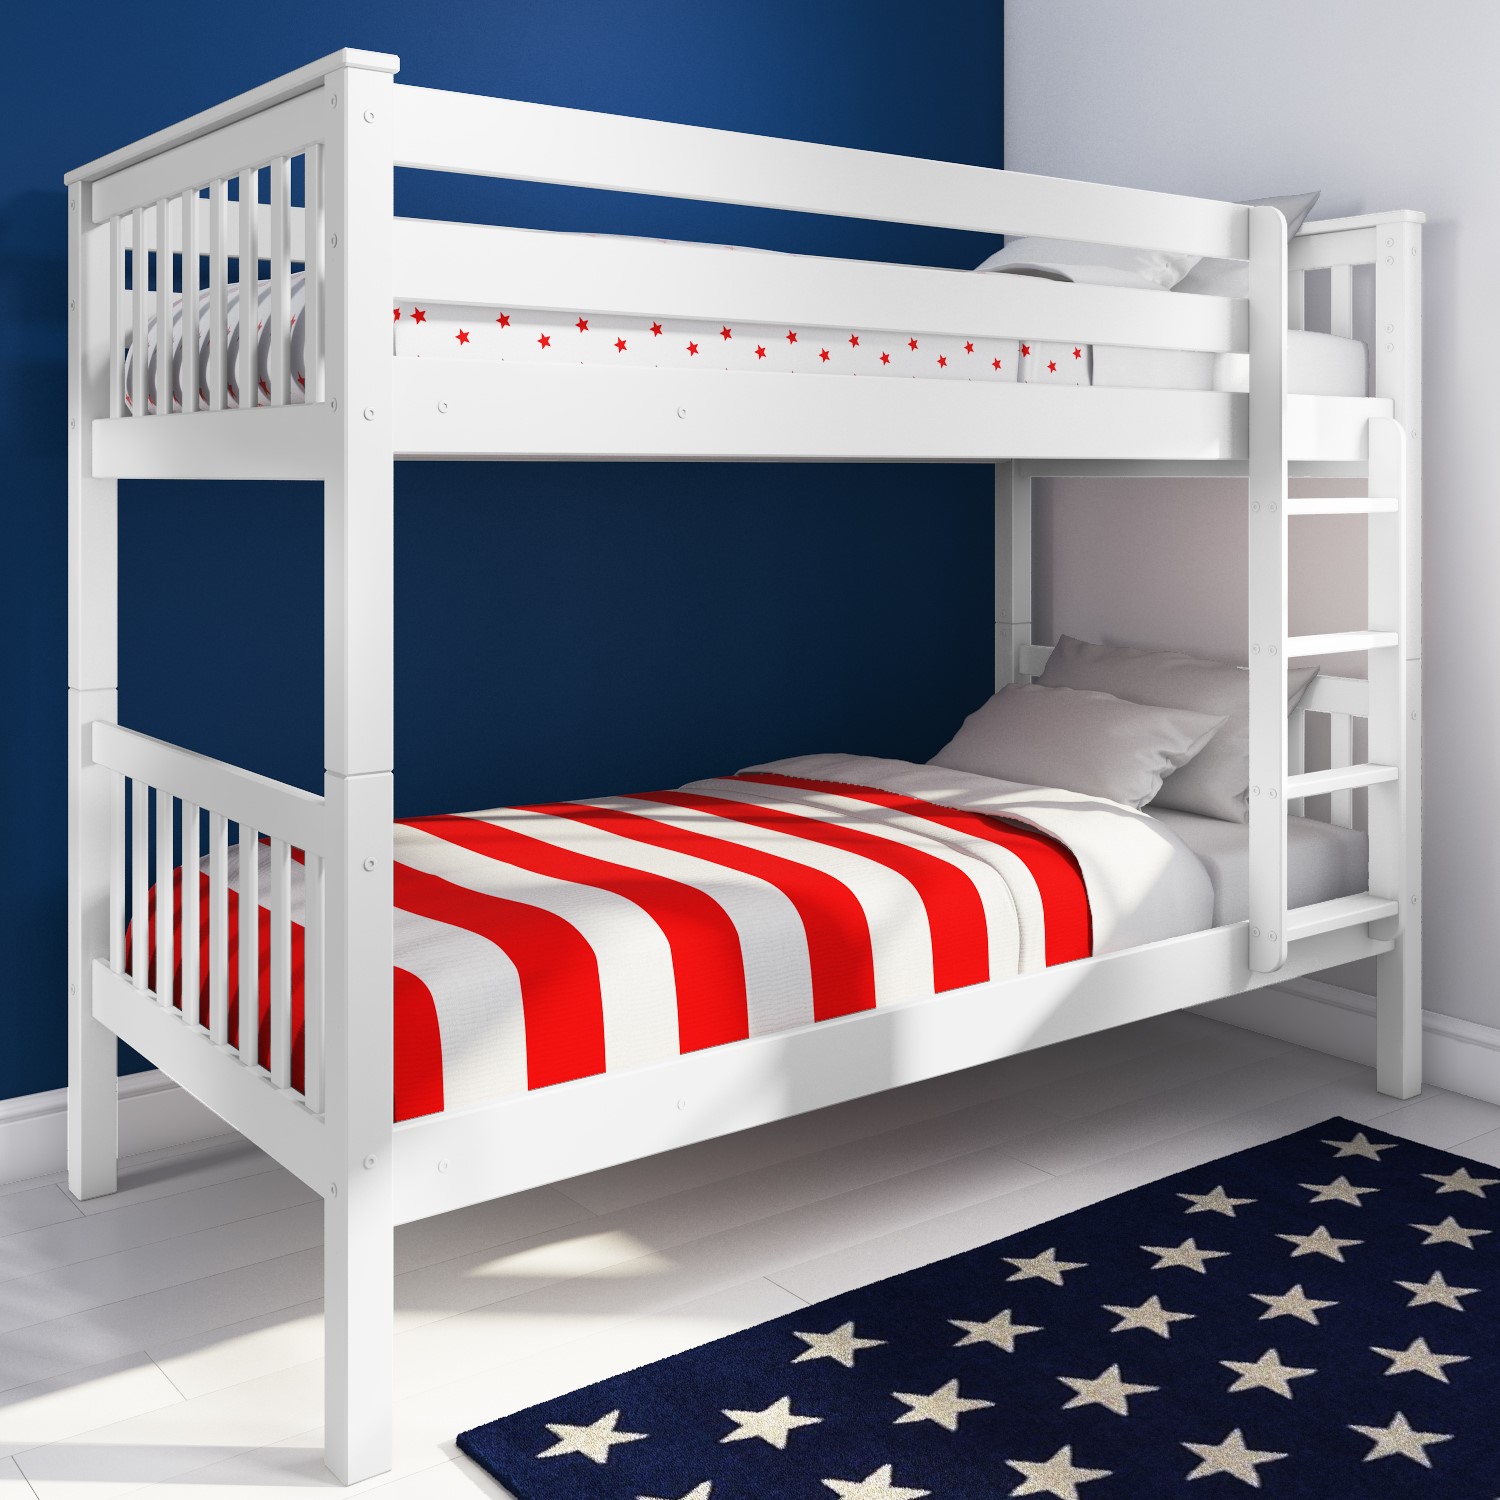 Oxford Single Bunk Bed In White, Bunk Beds That Separate Into Single Beds